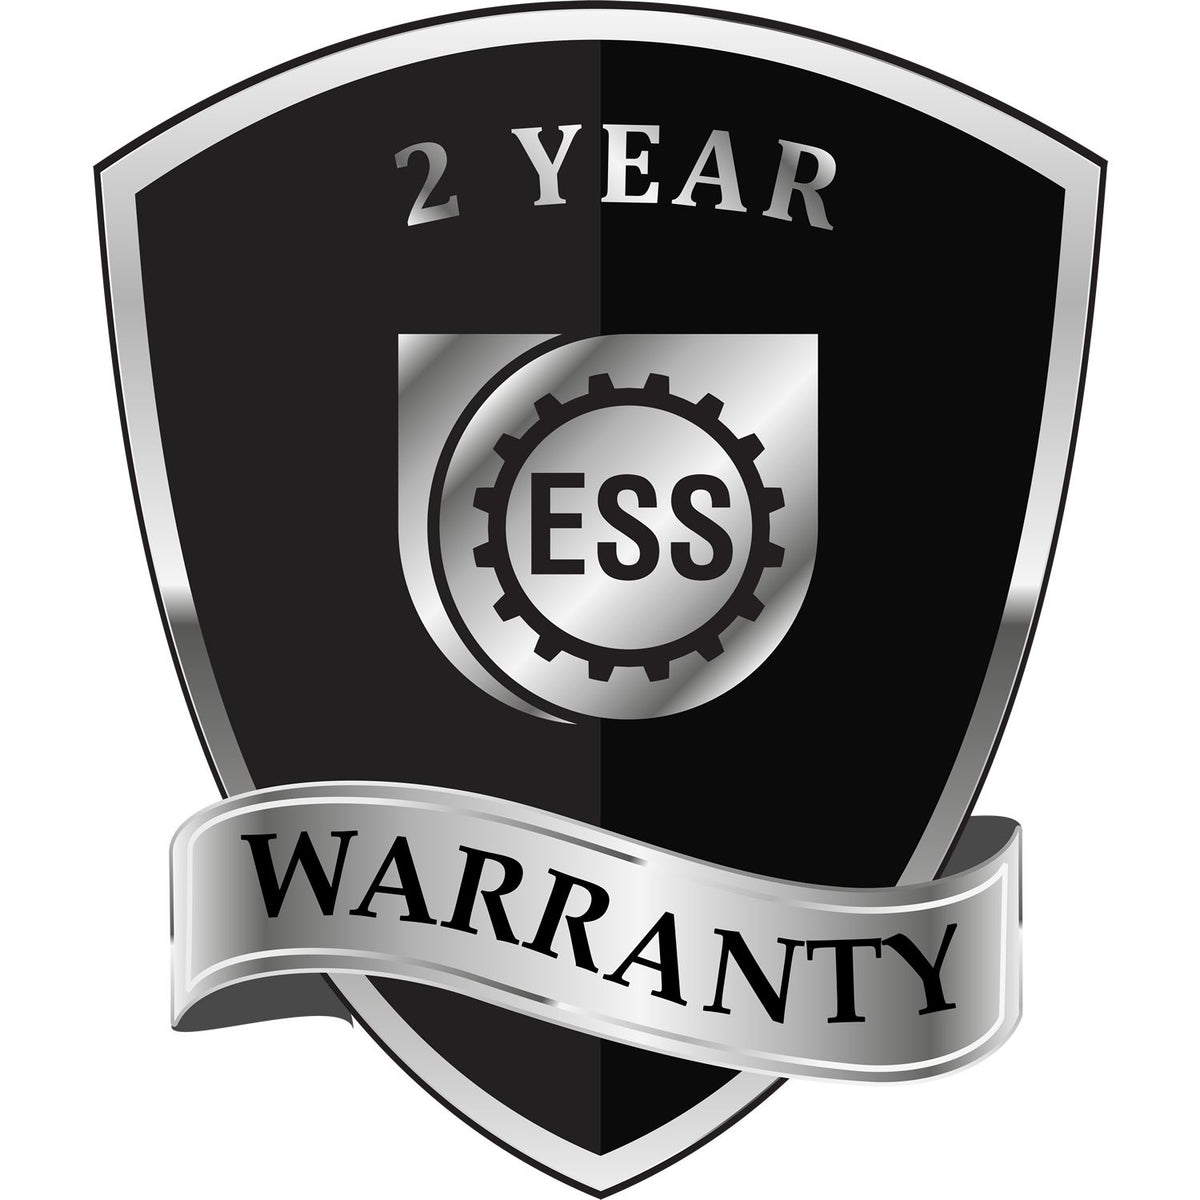 A badge or emblem showing a warranty icon for the Long Reach Washington PE Seal